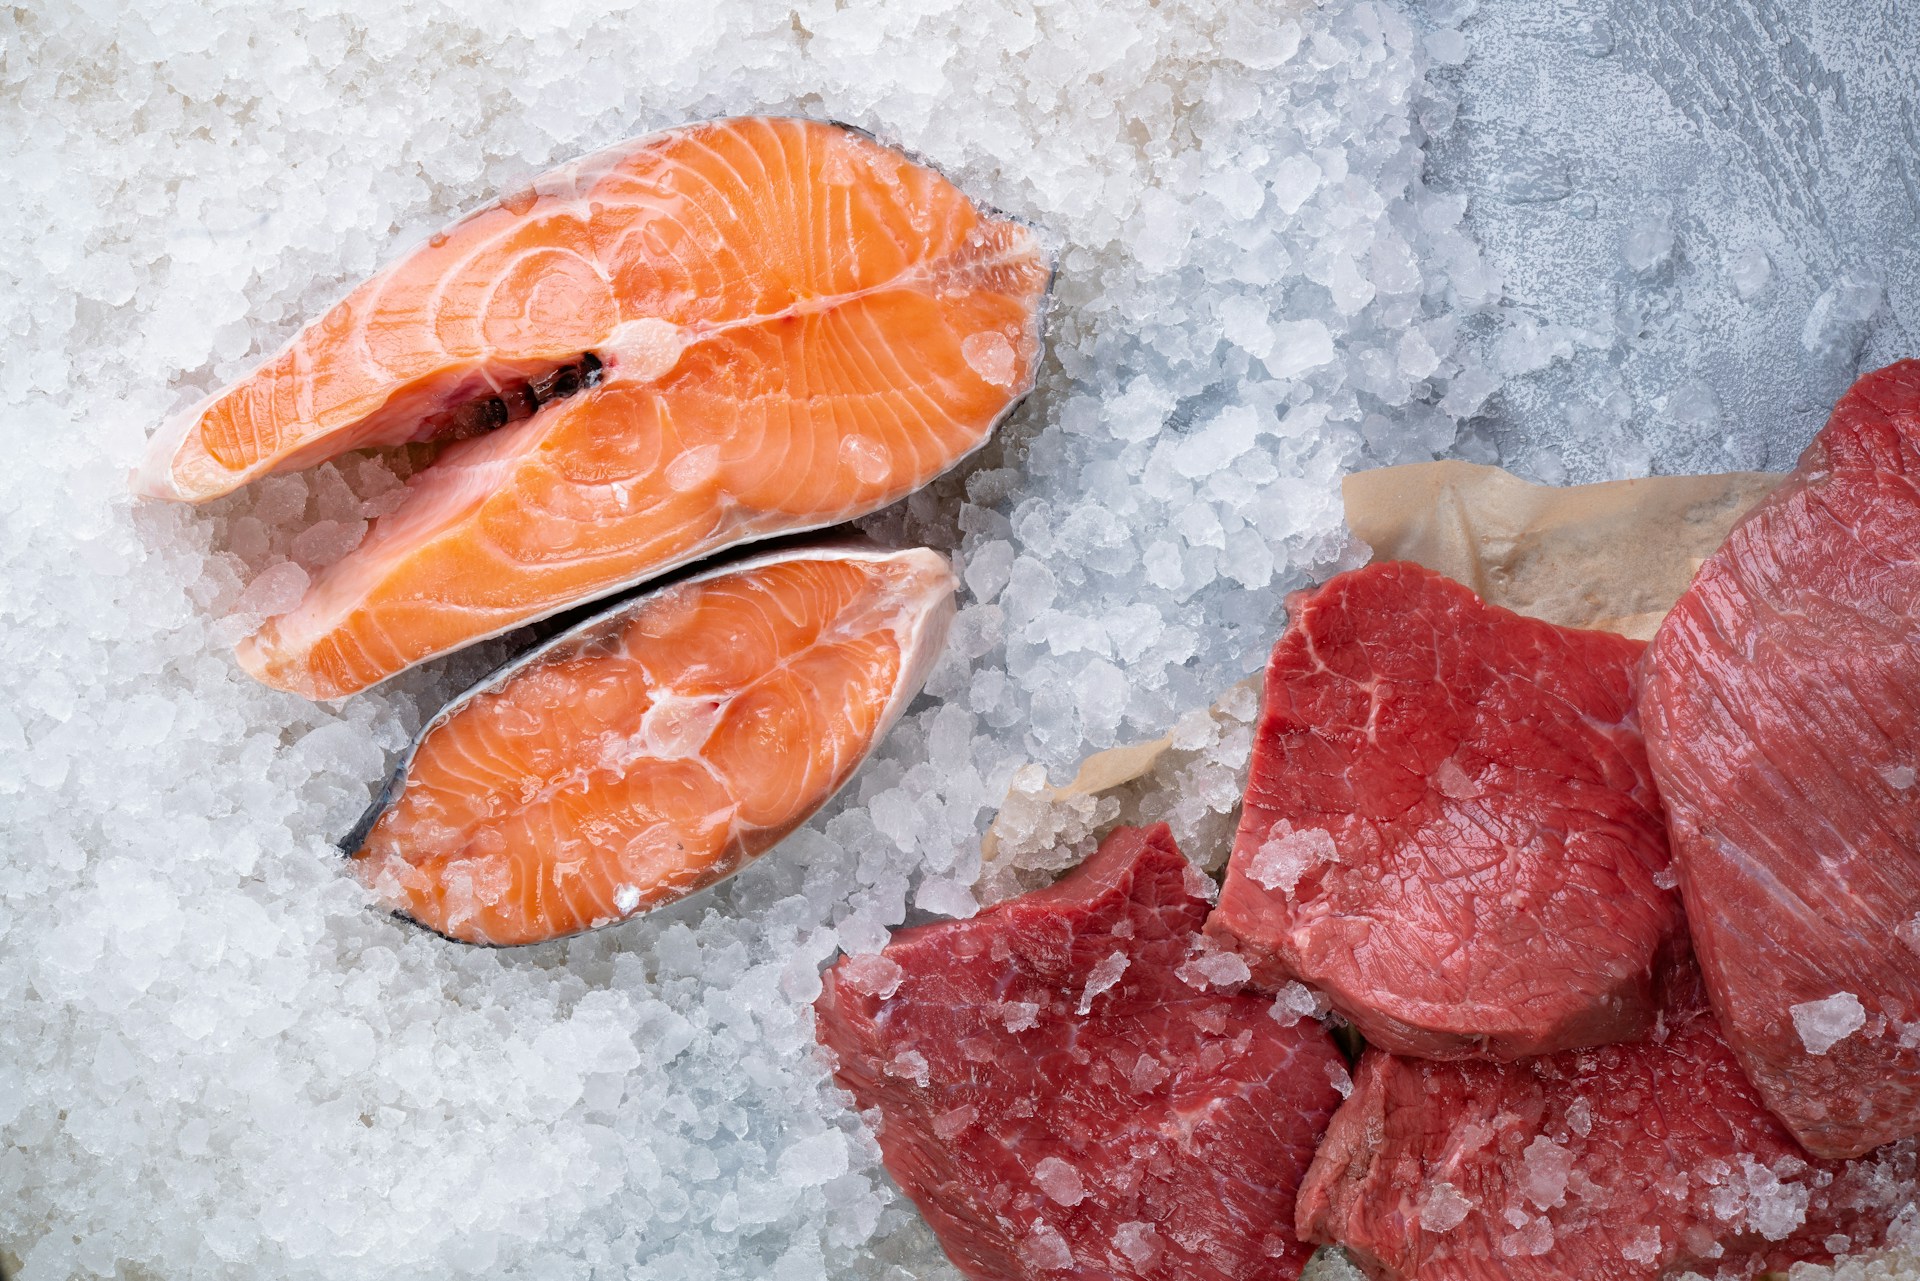 Photograph of meat and fish on ice